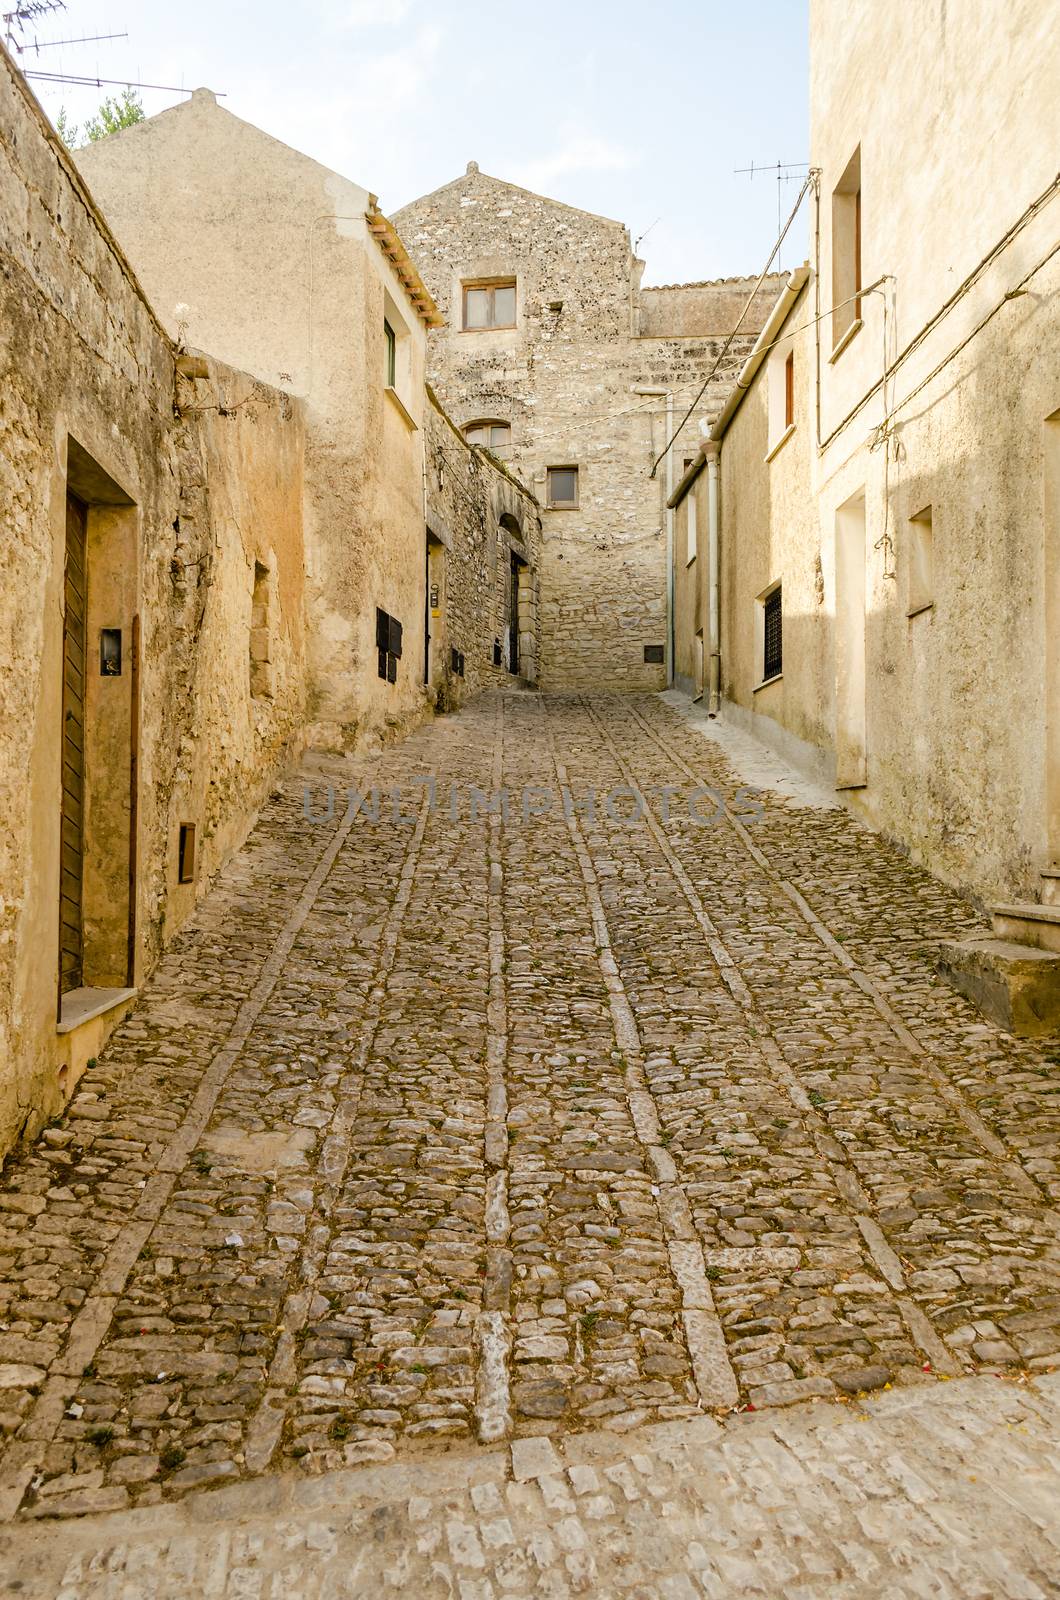 Stone paved ancient street in Erice, Sicily, Italy by marcorubino